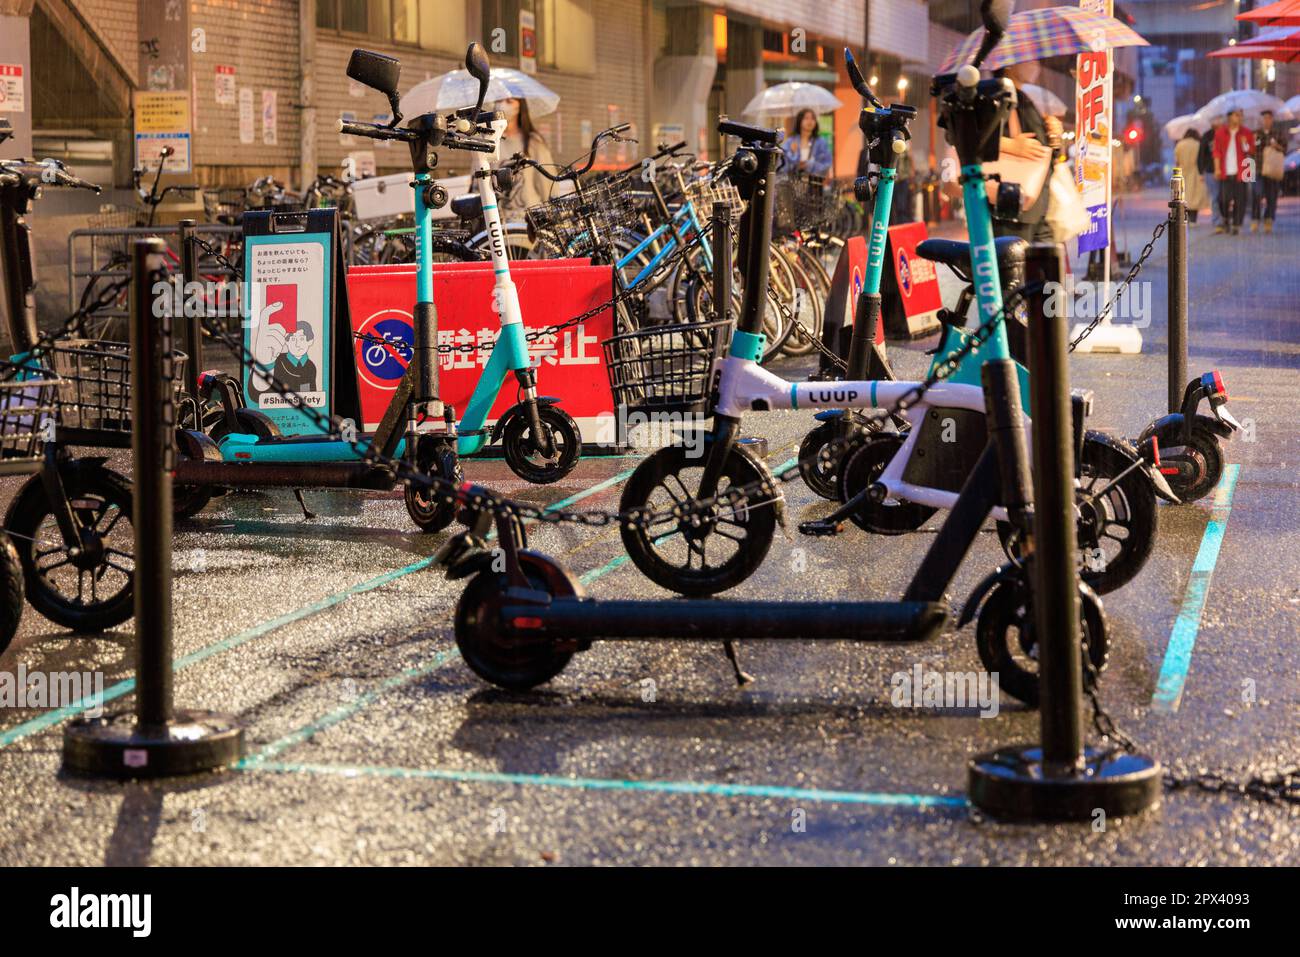 Osaka, Japan - April 29, 2023: Heavy rain on shared electric mini bikes and scooters parked on city street Stock Photo